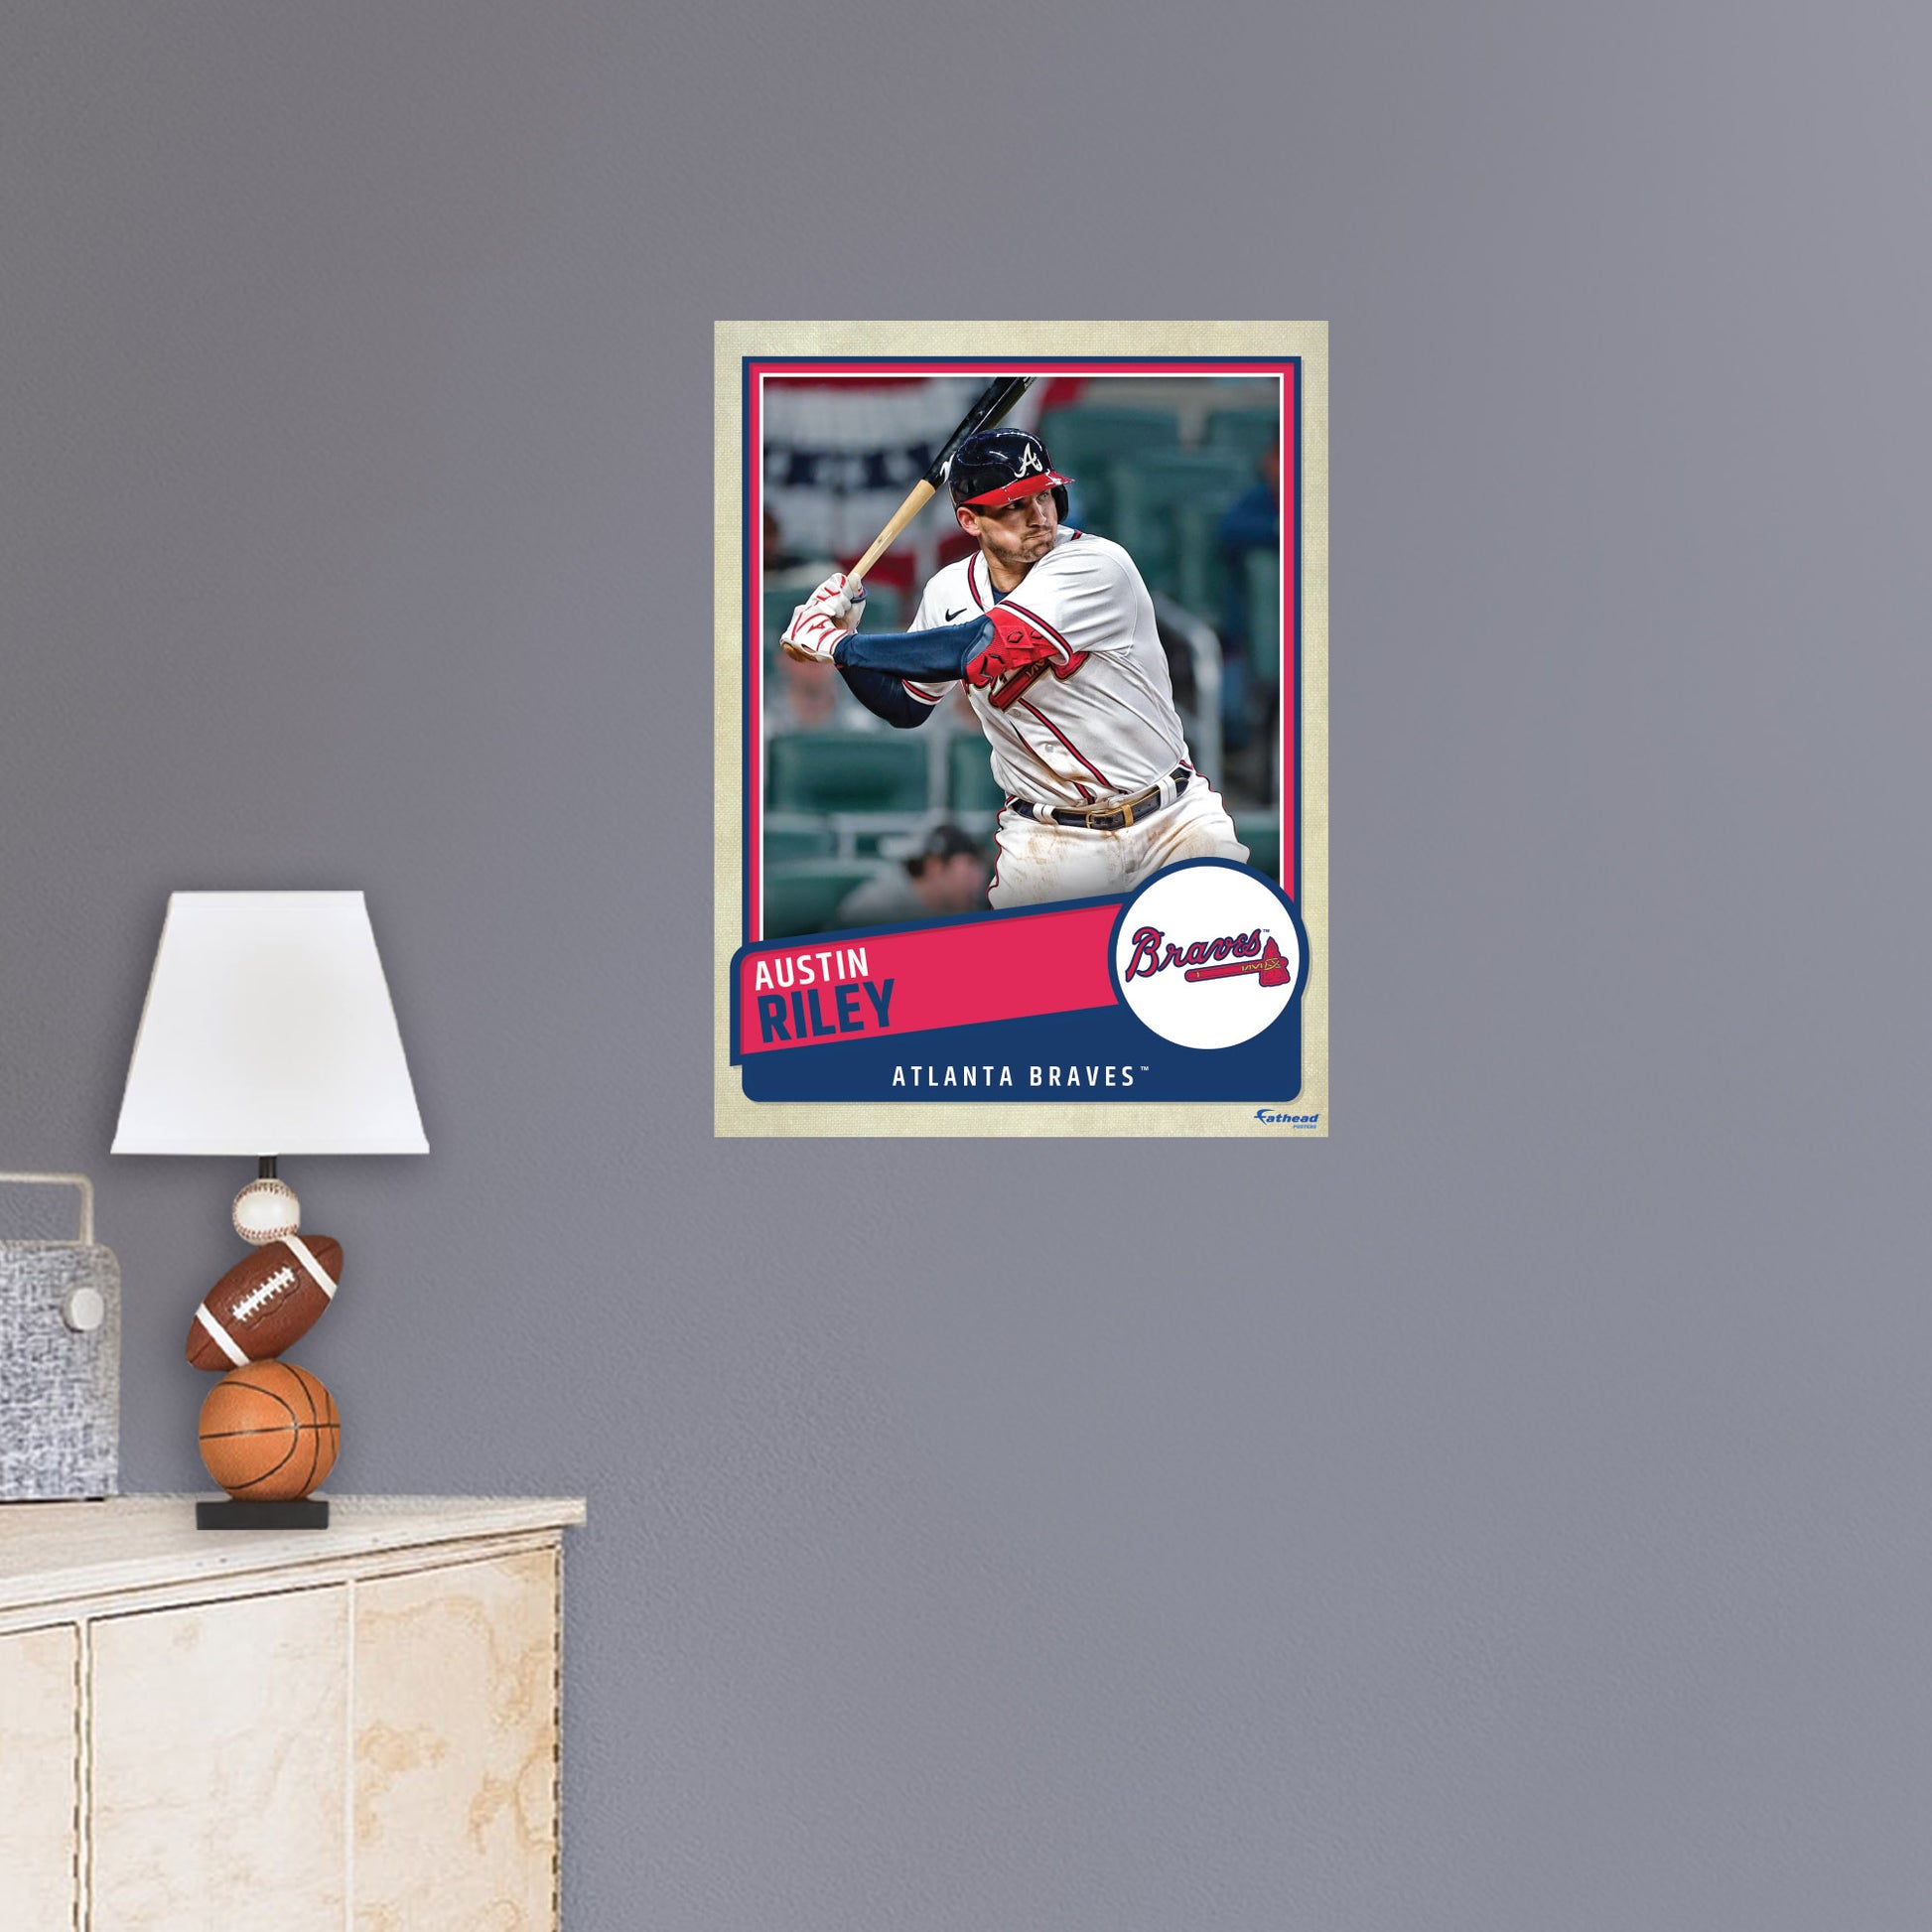 Atlanta Braves: Ozzie Albies 2022 Poster - Officially Licensed MLB Rem –  Fathead